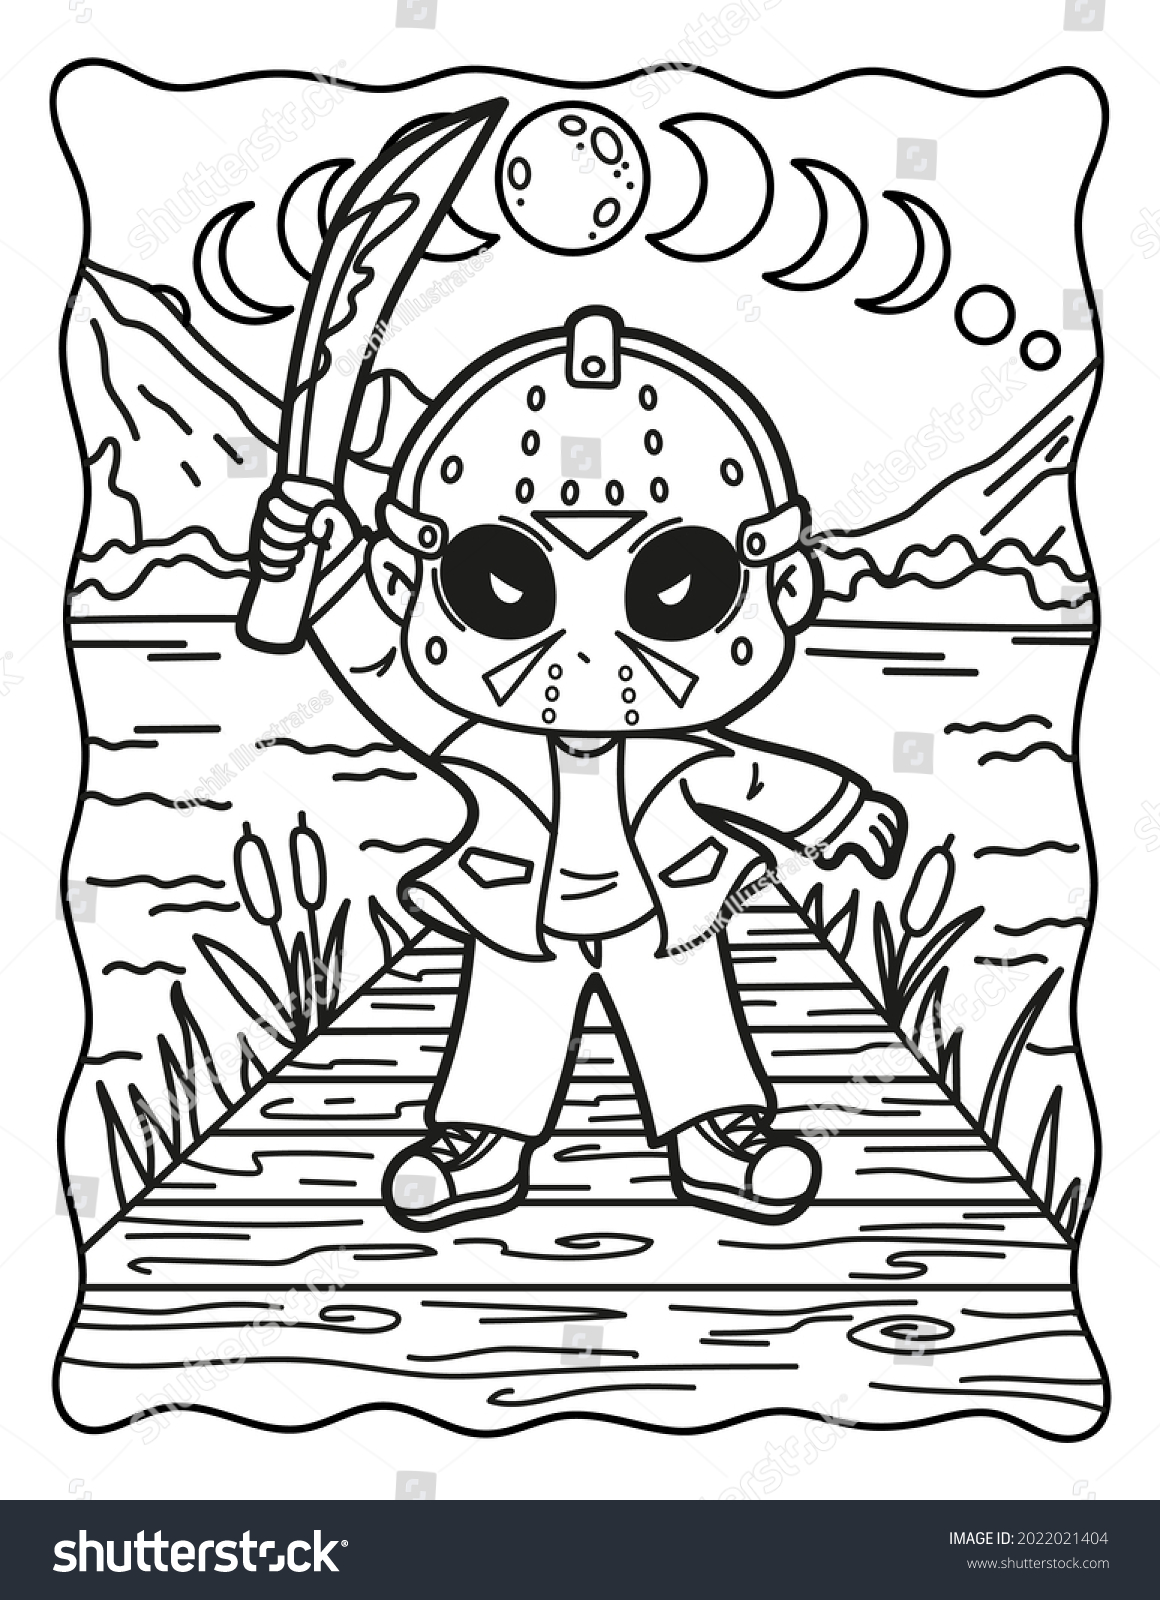 Spooky coloring pages coloring book children stock illustration